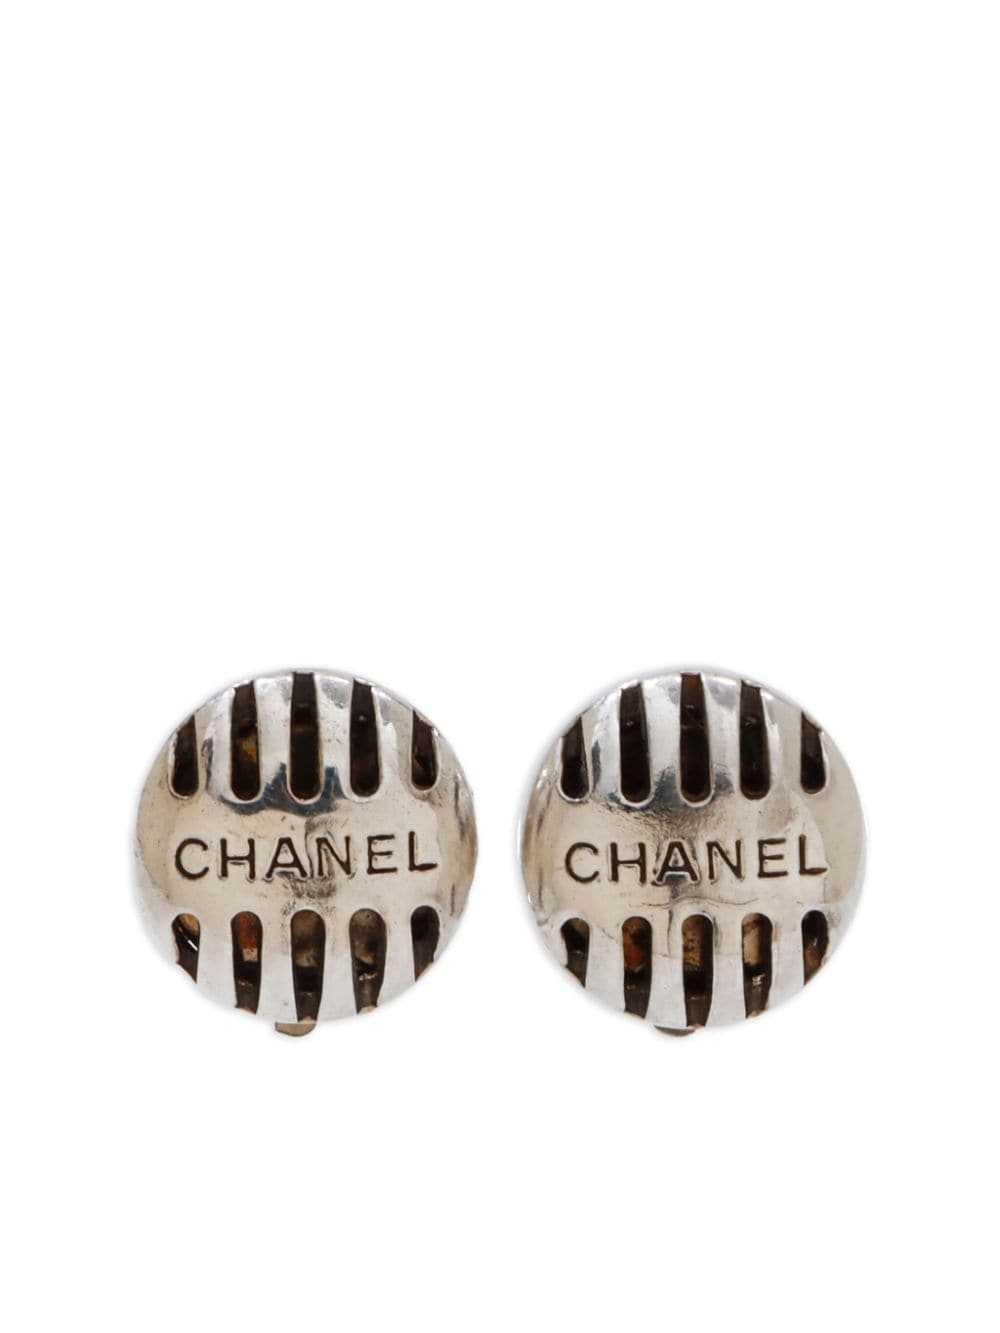 CHANEL Pre-Owned 1999 logo-engraved button clip-o… - image 1